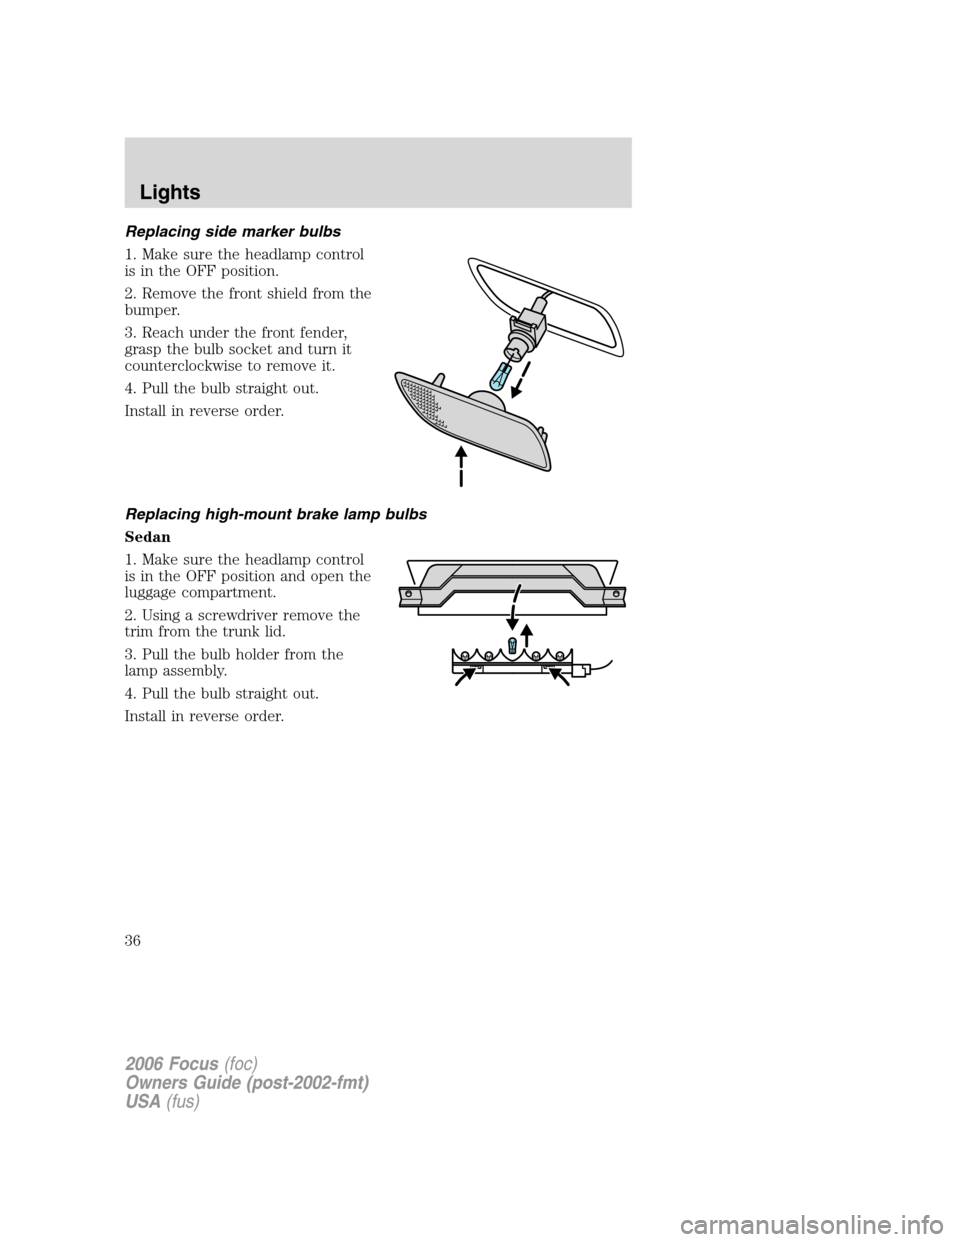 FORD FOCUS 2006 2.G Owners Manual Replacing side marker bulbs
1. Make sure the headlamp control
is in the OFF position.
2. Remove the front shield from the
bumper.
3. Reach under the front fender,
grasp the bulb socket and turn it
cou